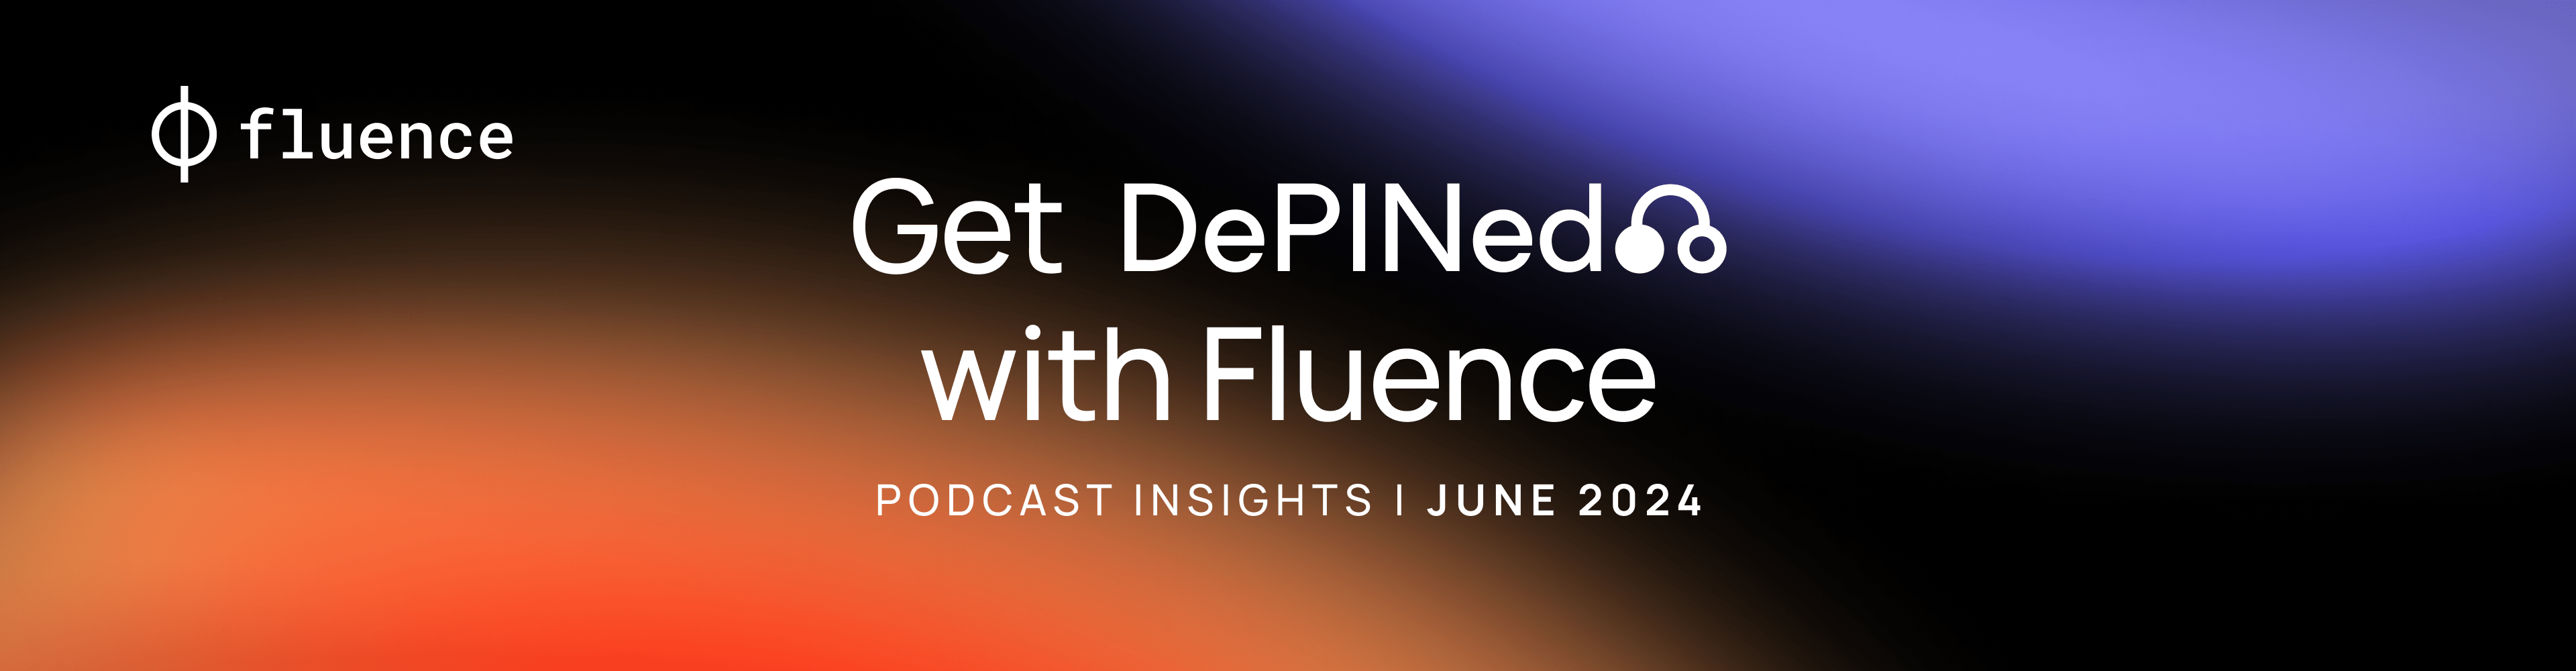 Get DePINed with Fluence: Hivemapper, Akash & WeatherXM